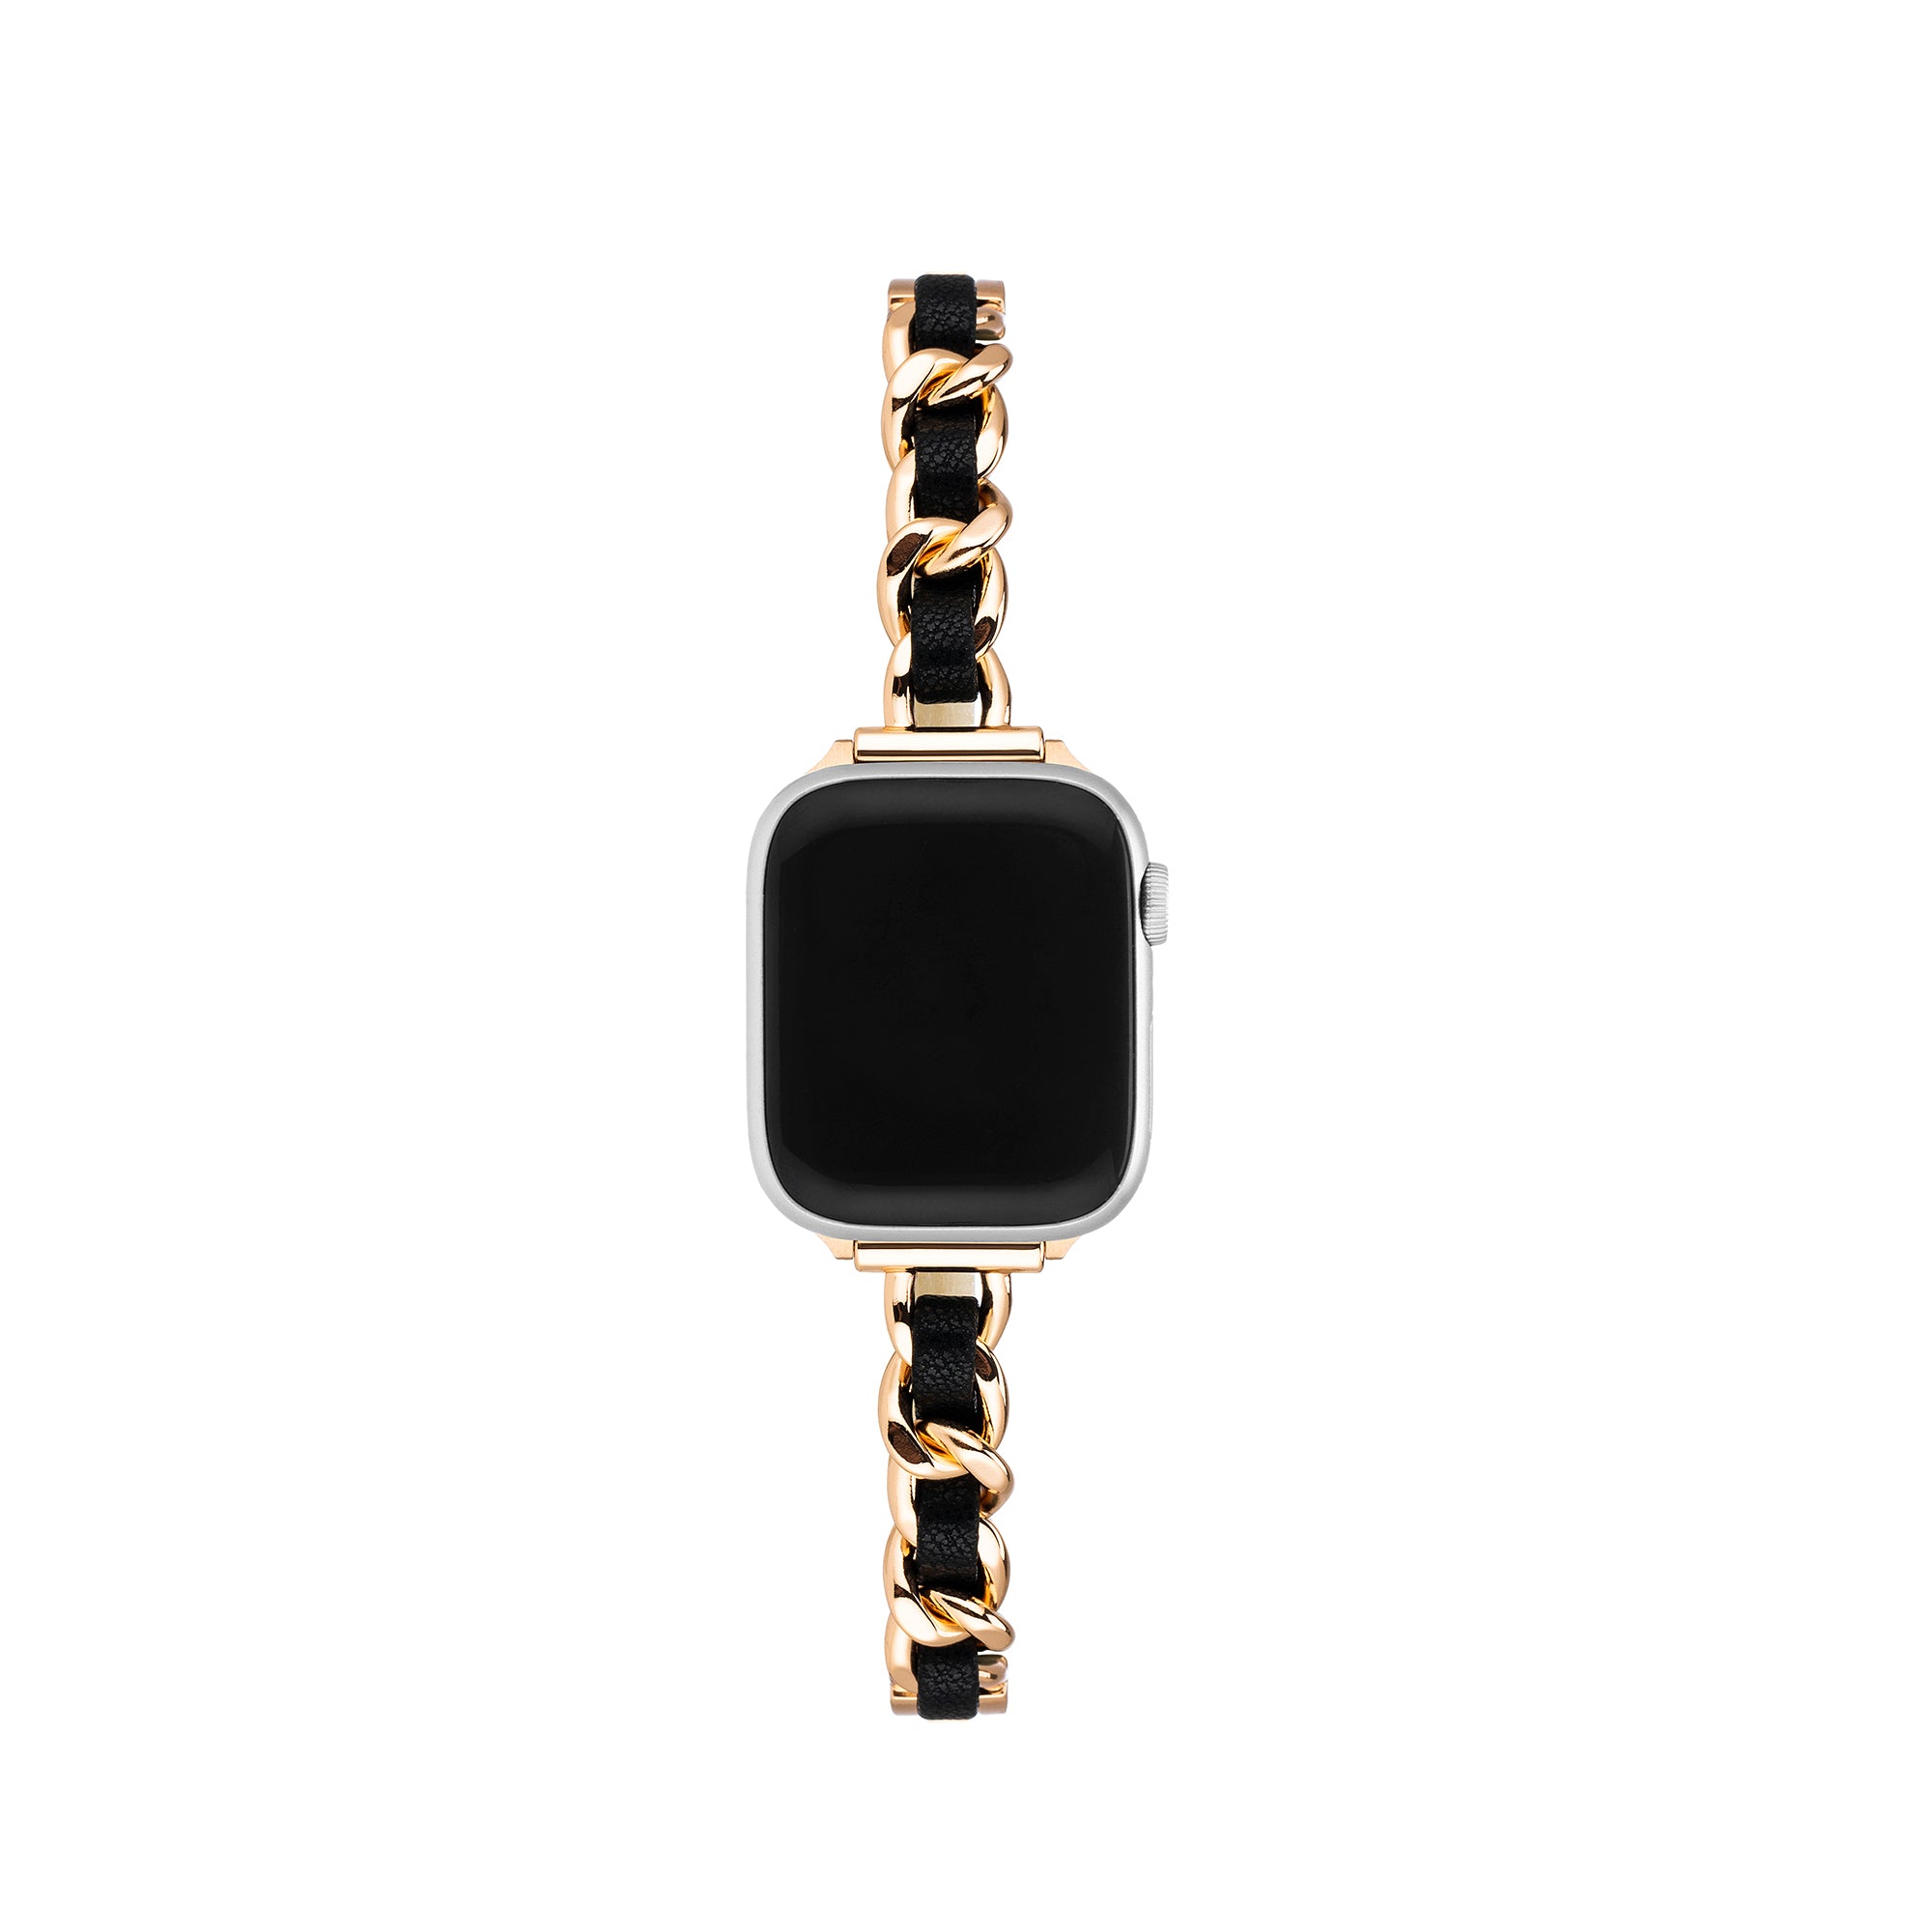 Twisted Metal Apple Watch Band